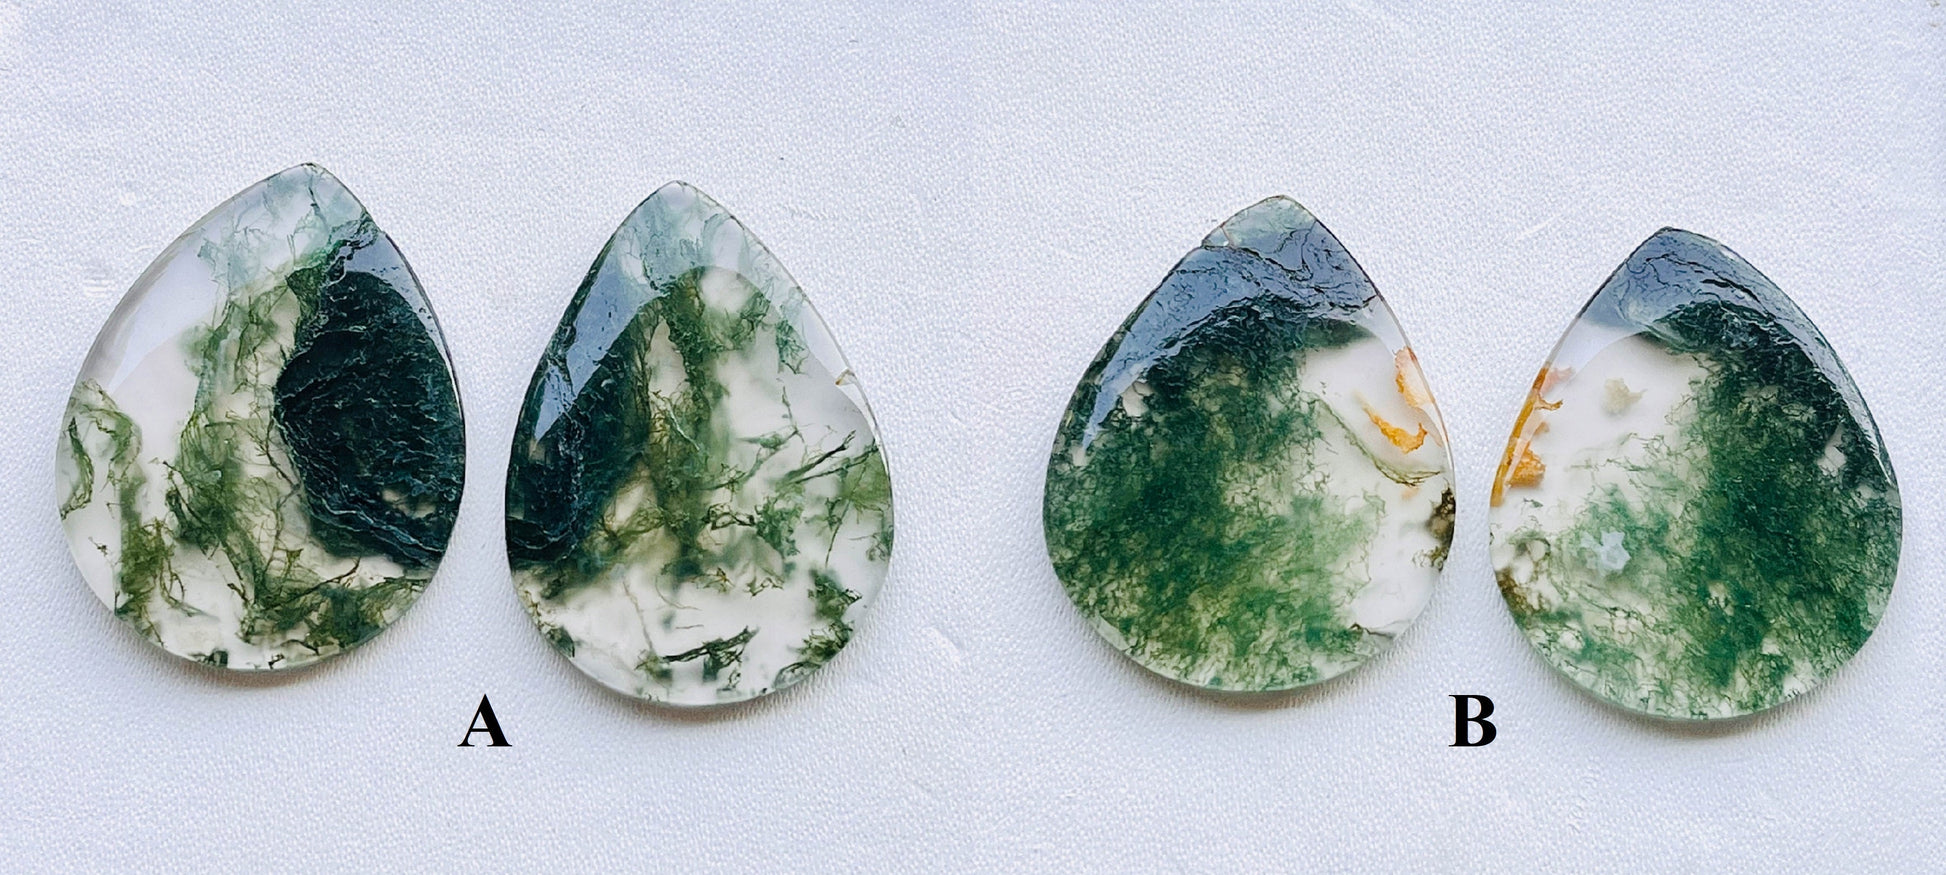 Pair of Moss Agate Pear Shape Briolette Beadsforyourjewelry